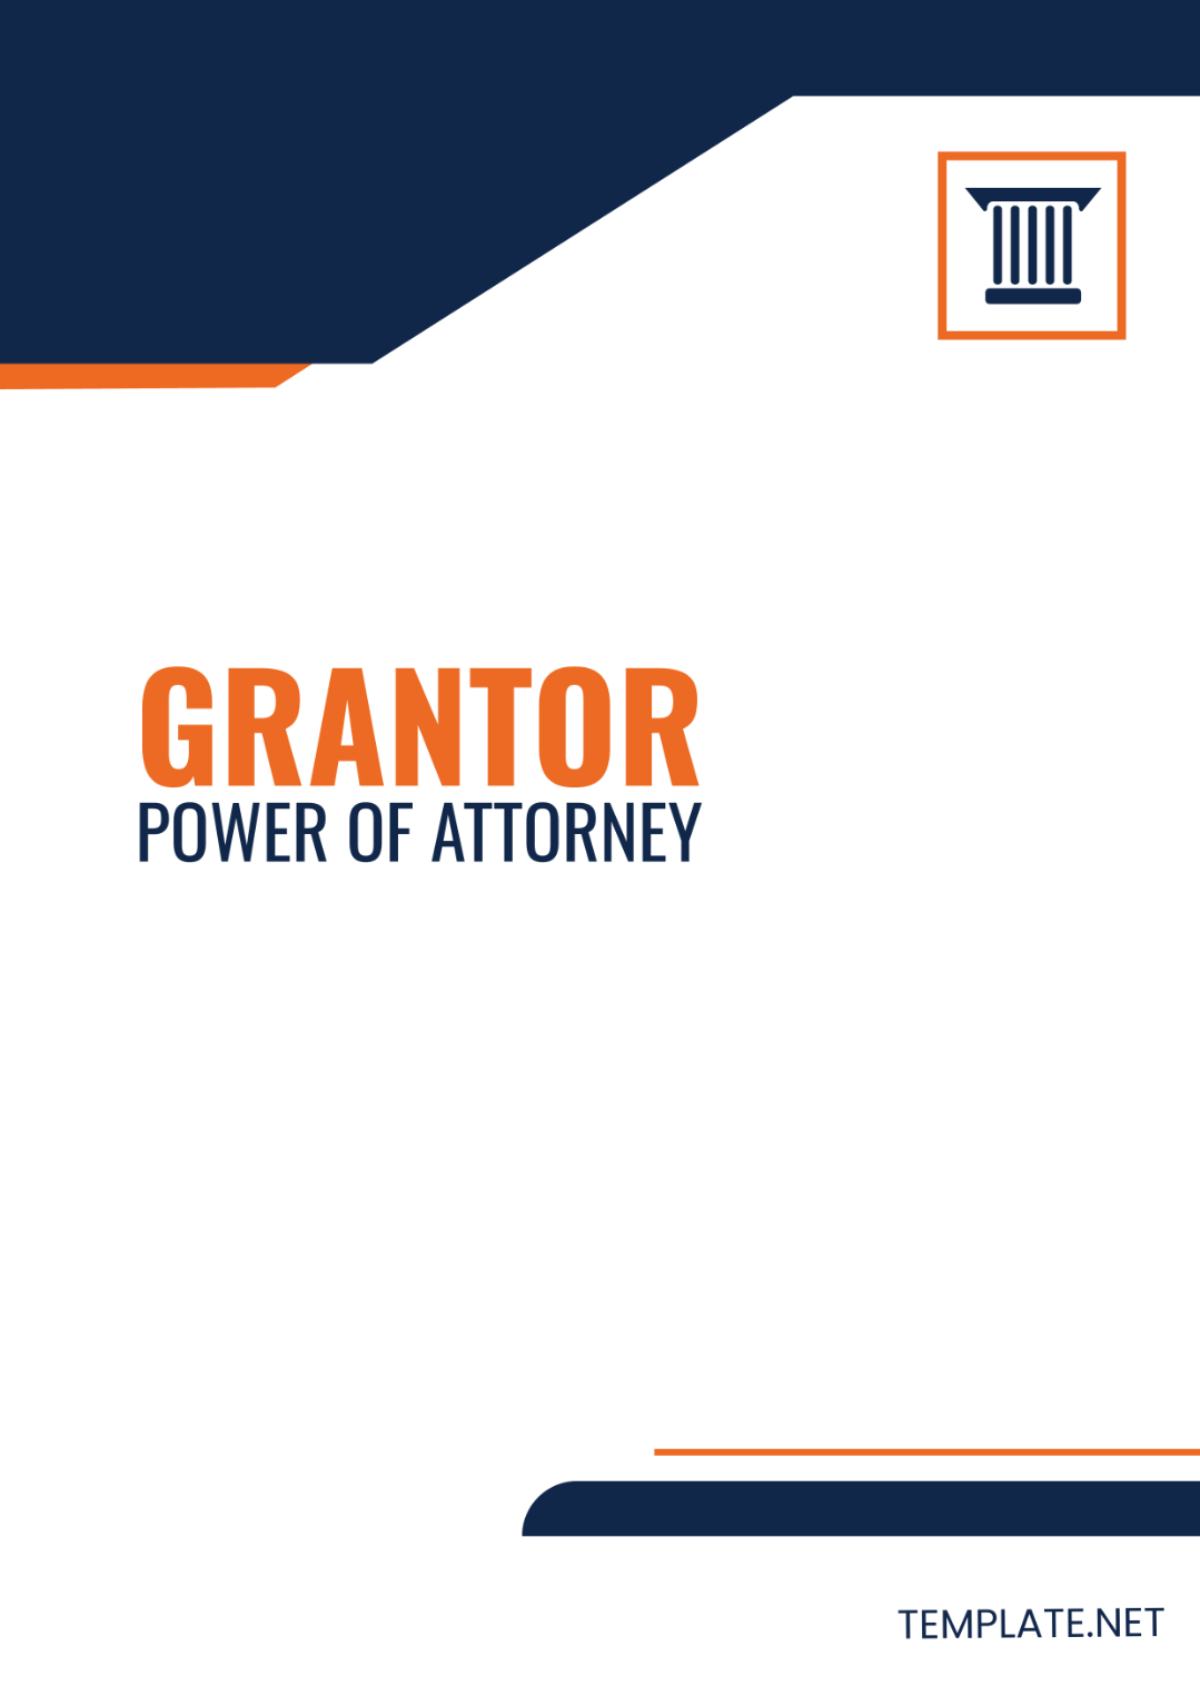 Grantor Power of Attorney Template